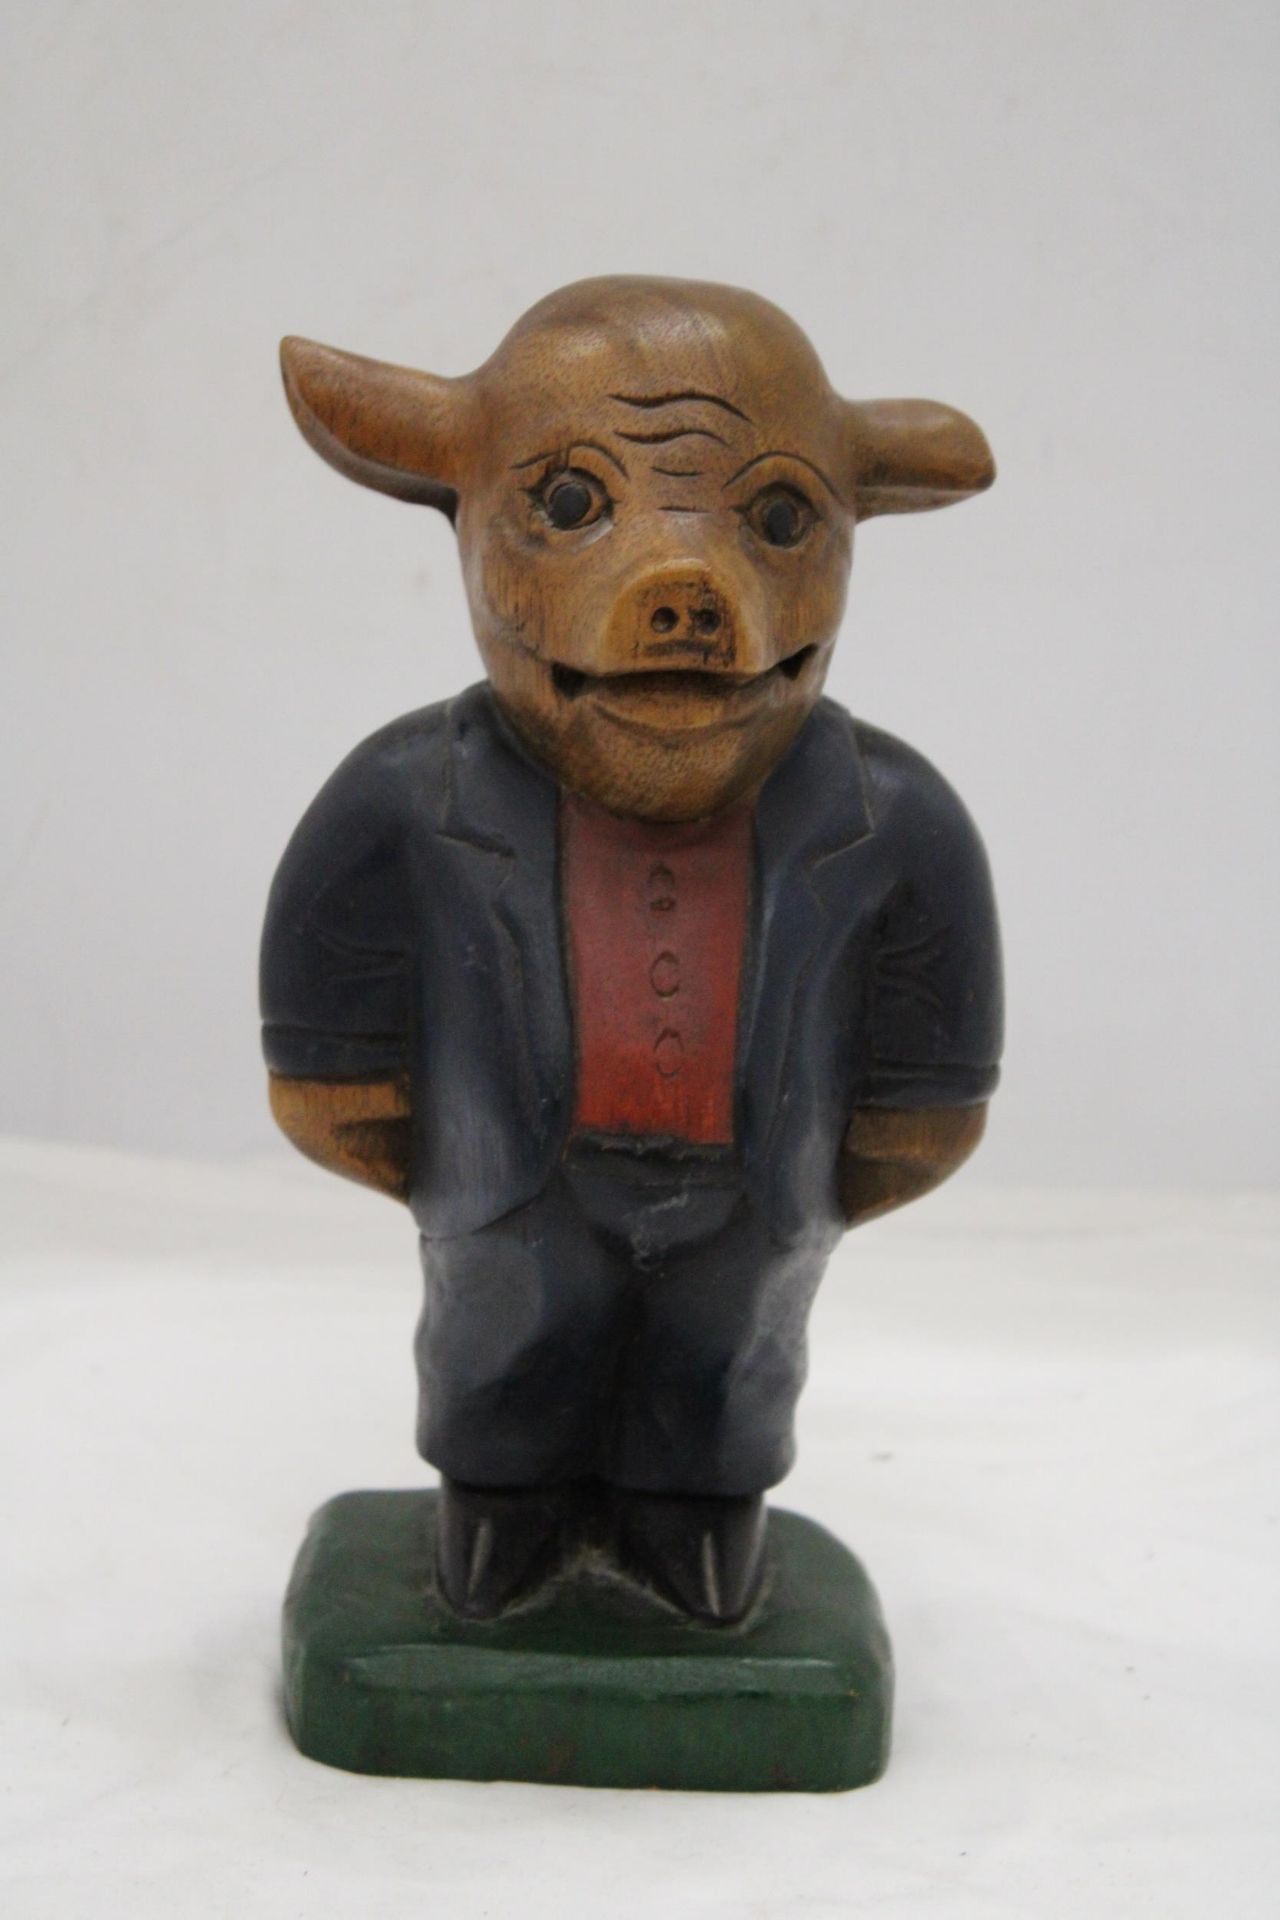 A LARGE, HAND CARVED, HANDPAINTED, WOODEN POSH PIG, HEIGHT 28CM - Image 2 of 5